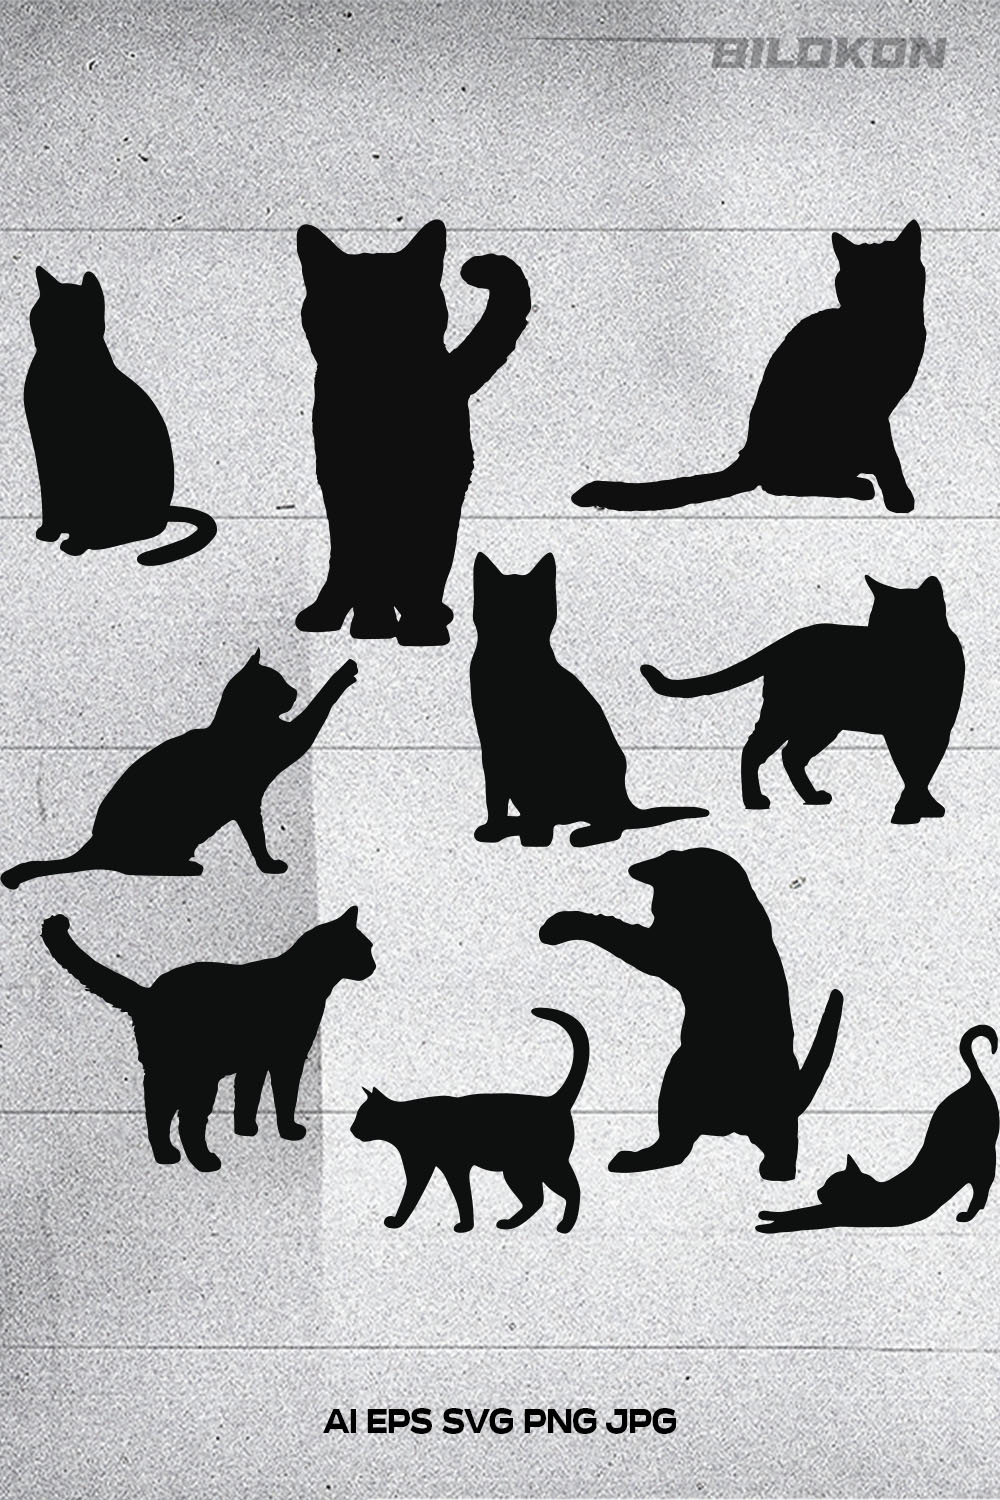 Series of silhouettes of cats and kittens.